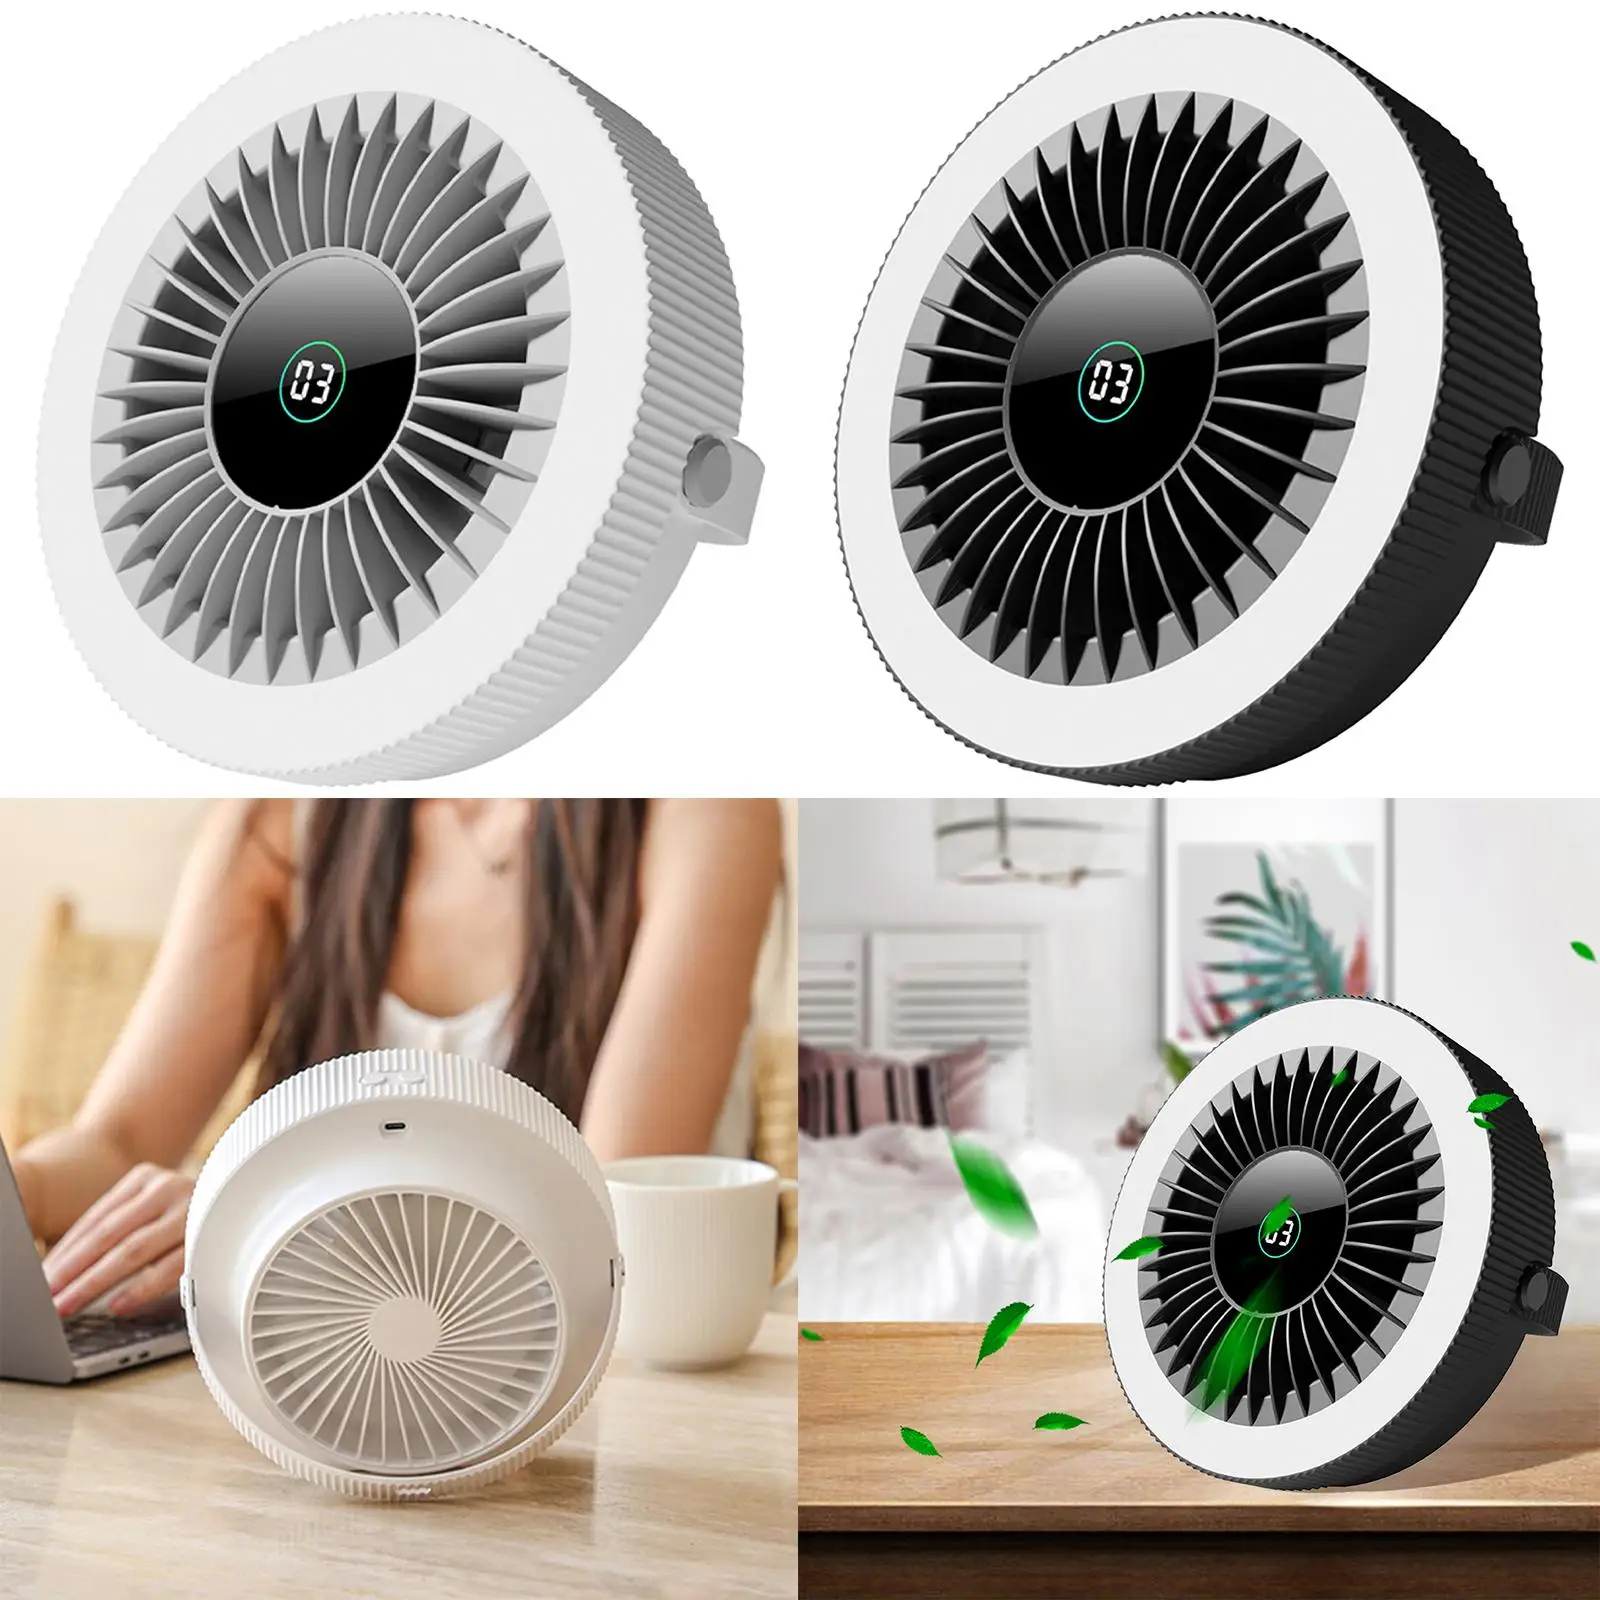 Portable Air Circulator Fan Outdoor Camping Ceiling Fan Rechargeable 3 Speed